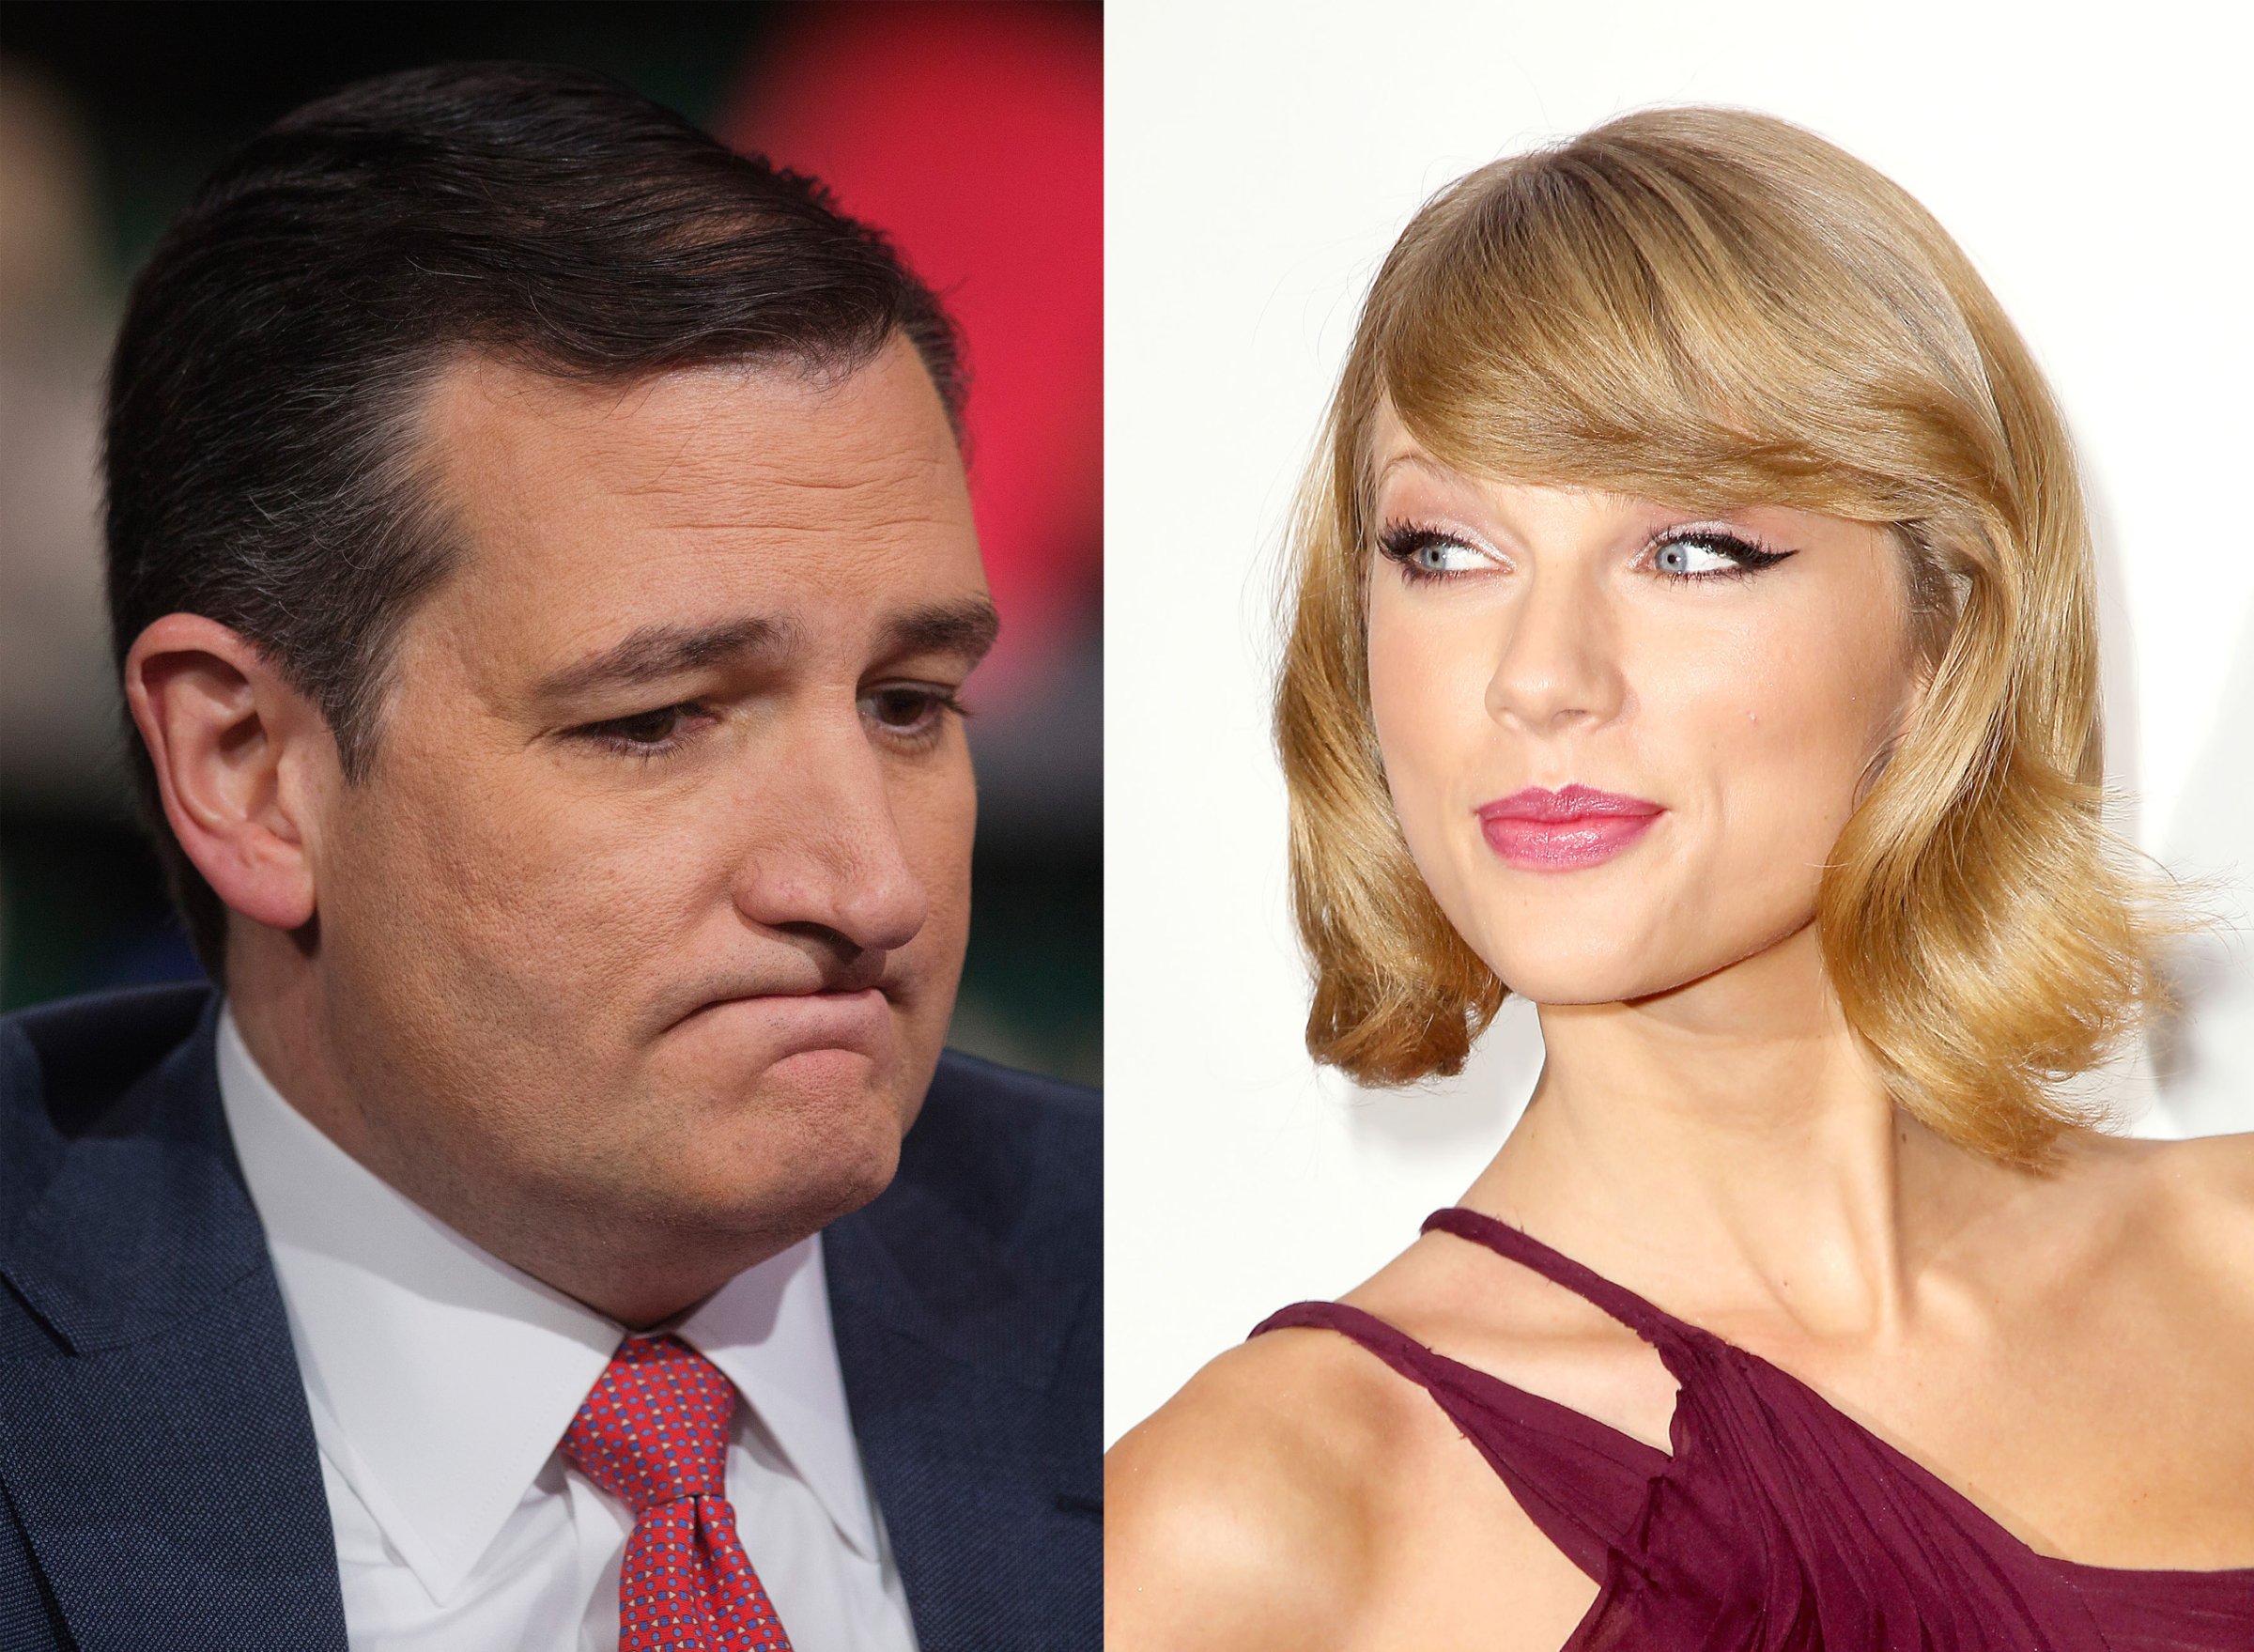 Left: Ted Cruz; right: Taylor Swift